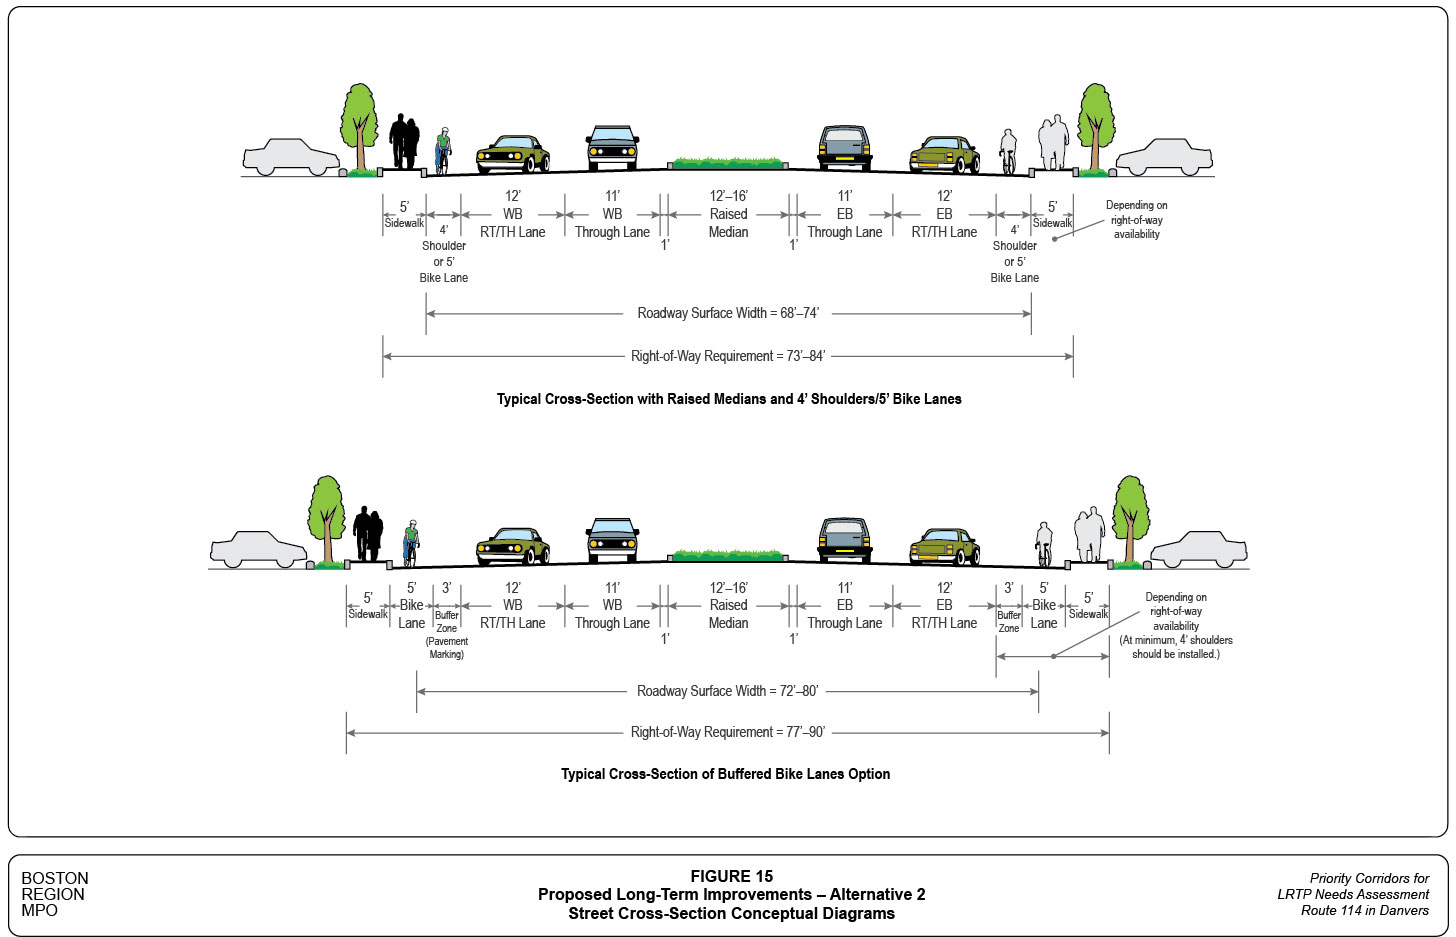 Figure 15 shows the proposed roadway cross-sections for Alternative 2.